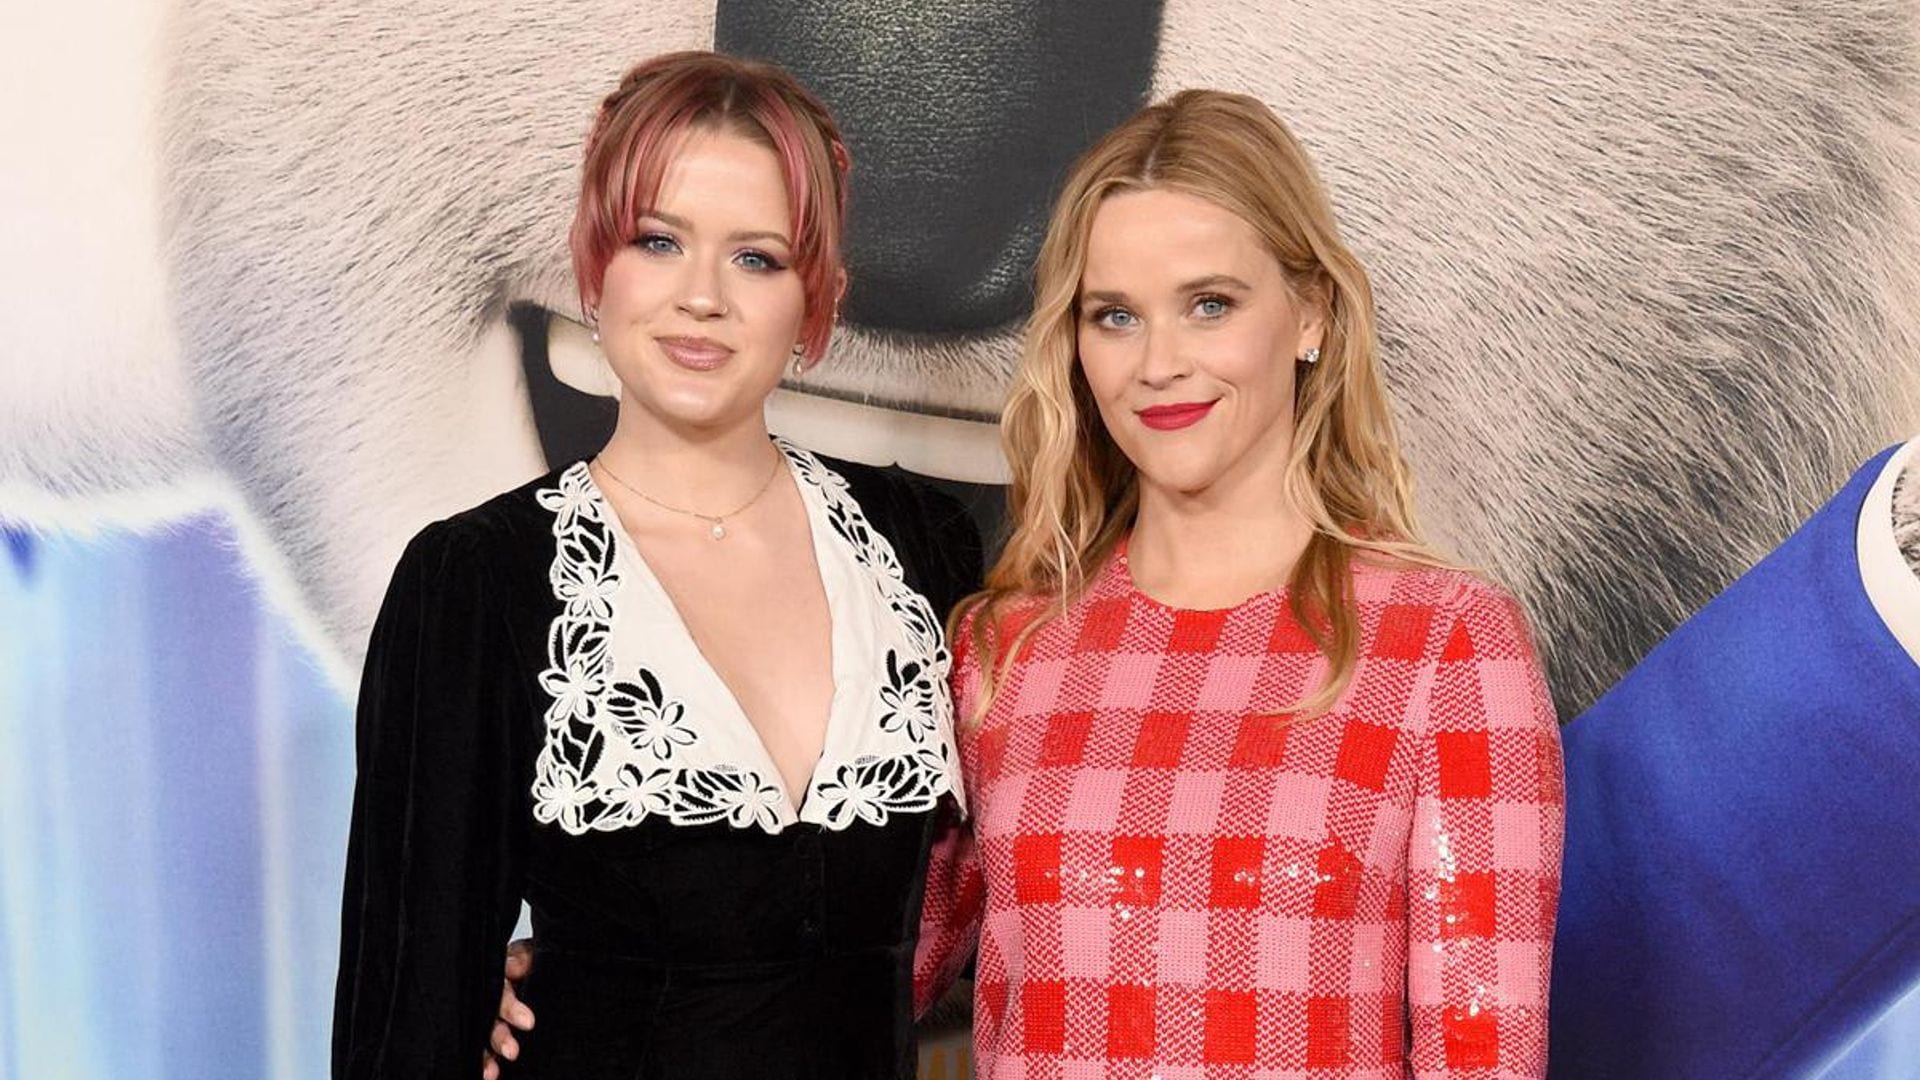 Reese Witherspoon says she doesn’t see the resemblance with daughter Ava Phillippe